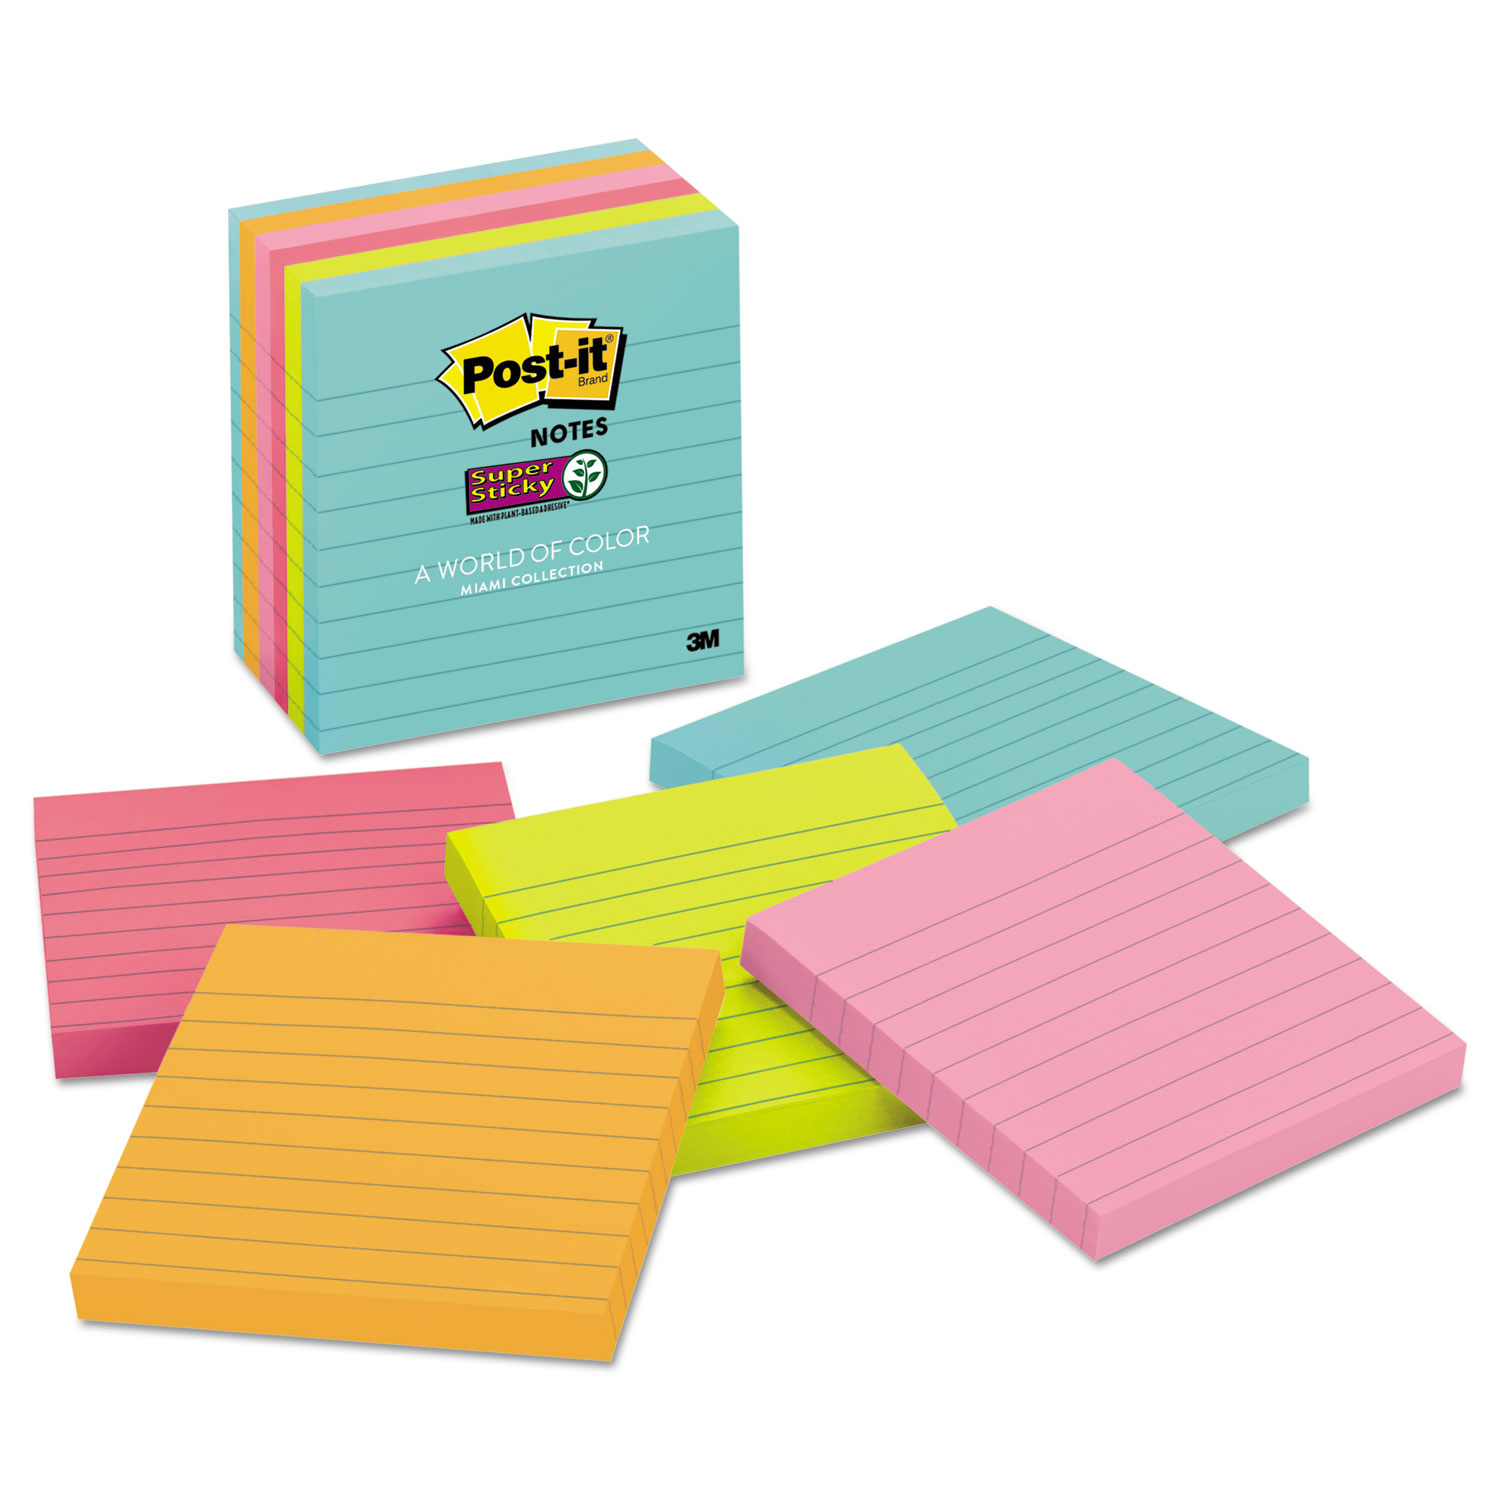  Post-it Notes Super Sticky 675-6SSMIA Pads in Miami Colors, Lined, 4 x 4, 90/Pad, 6 Pads/Pack (MMM6756SSMIA) 